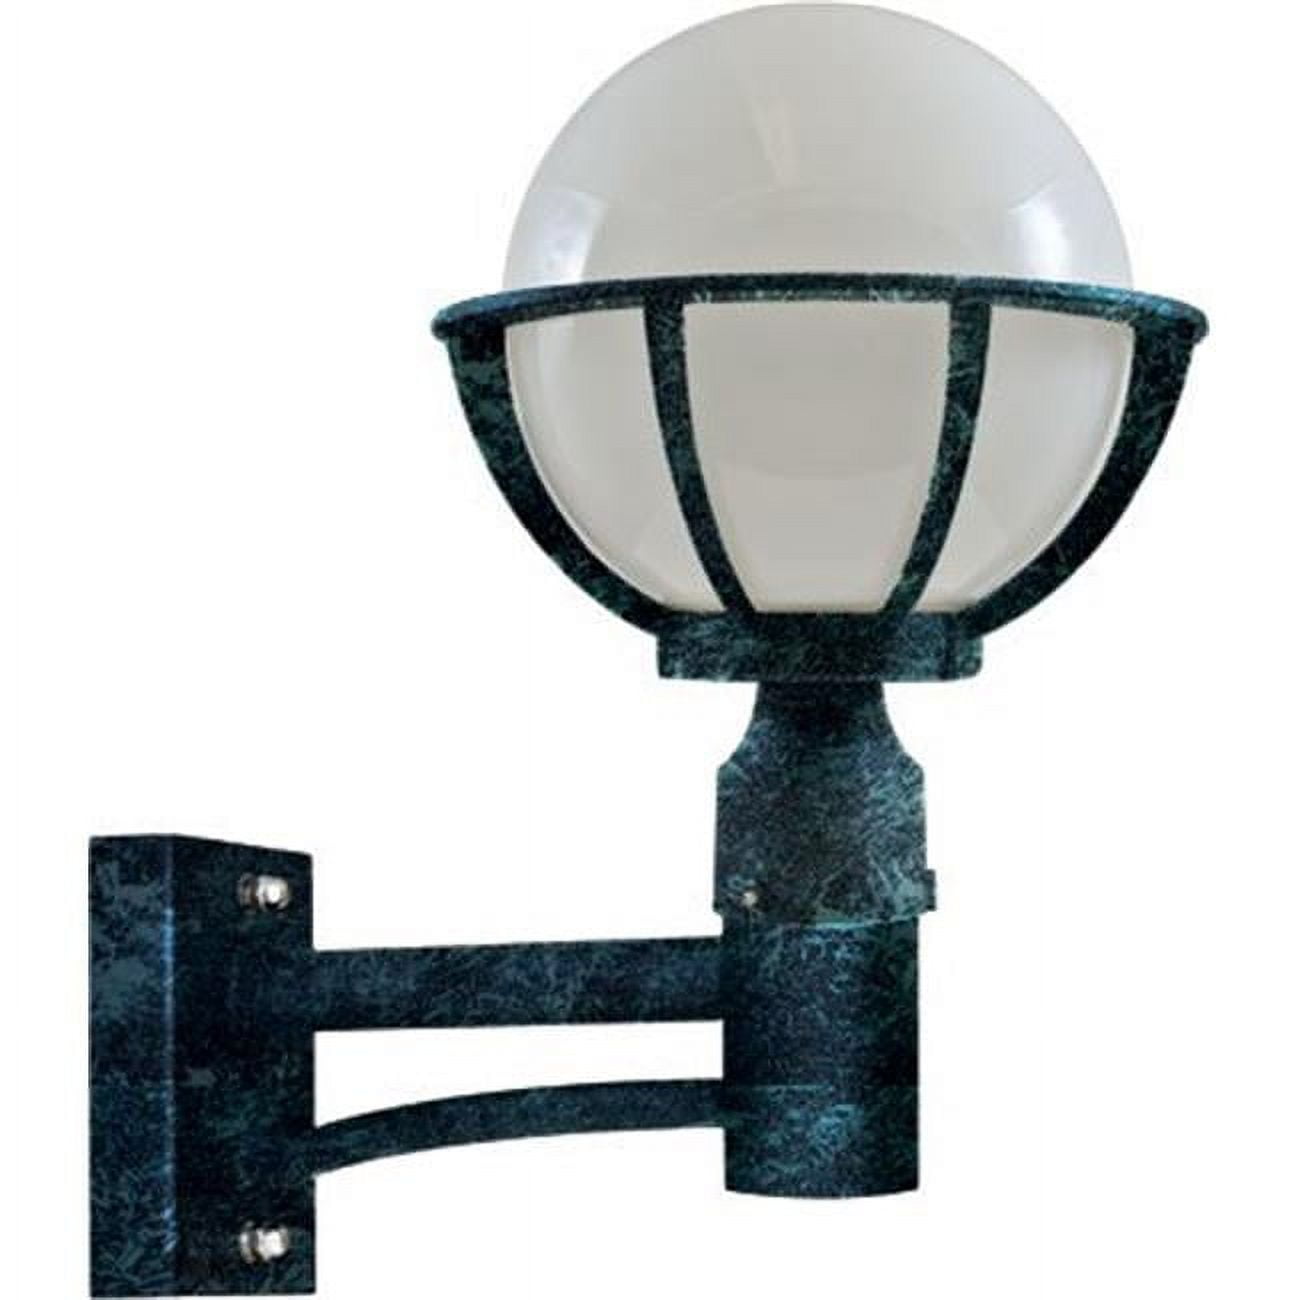 Picture of Dabmar Lighting GM267-VG 26 watt DL-S26-GU24 120 V Cast Aluminum 10 in. Globe Wall Fixture with Pre-Wired, Black & Verde Green